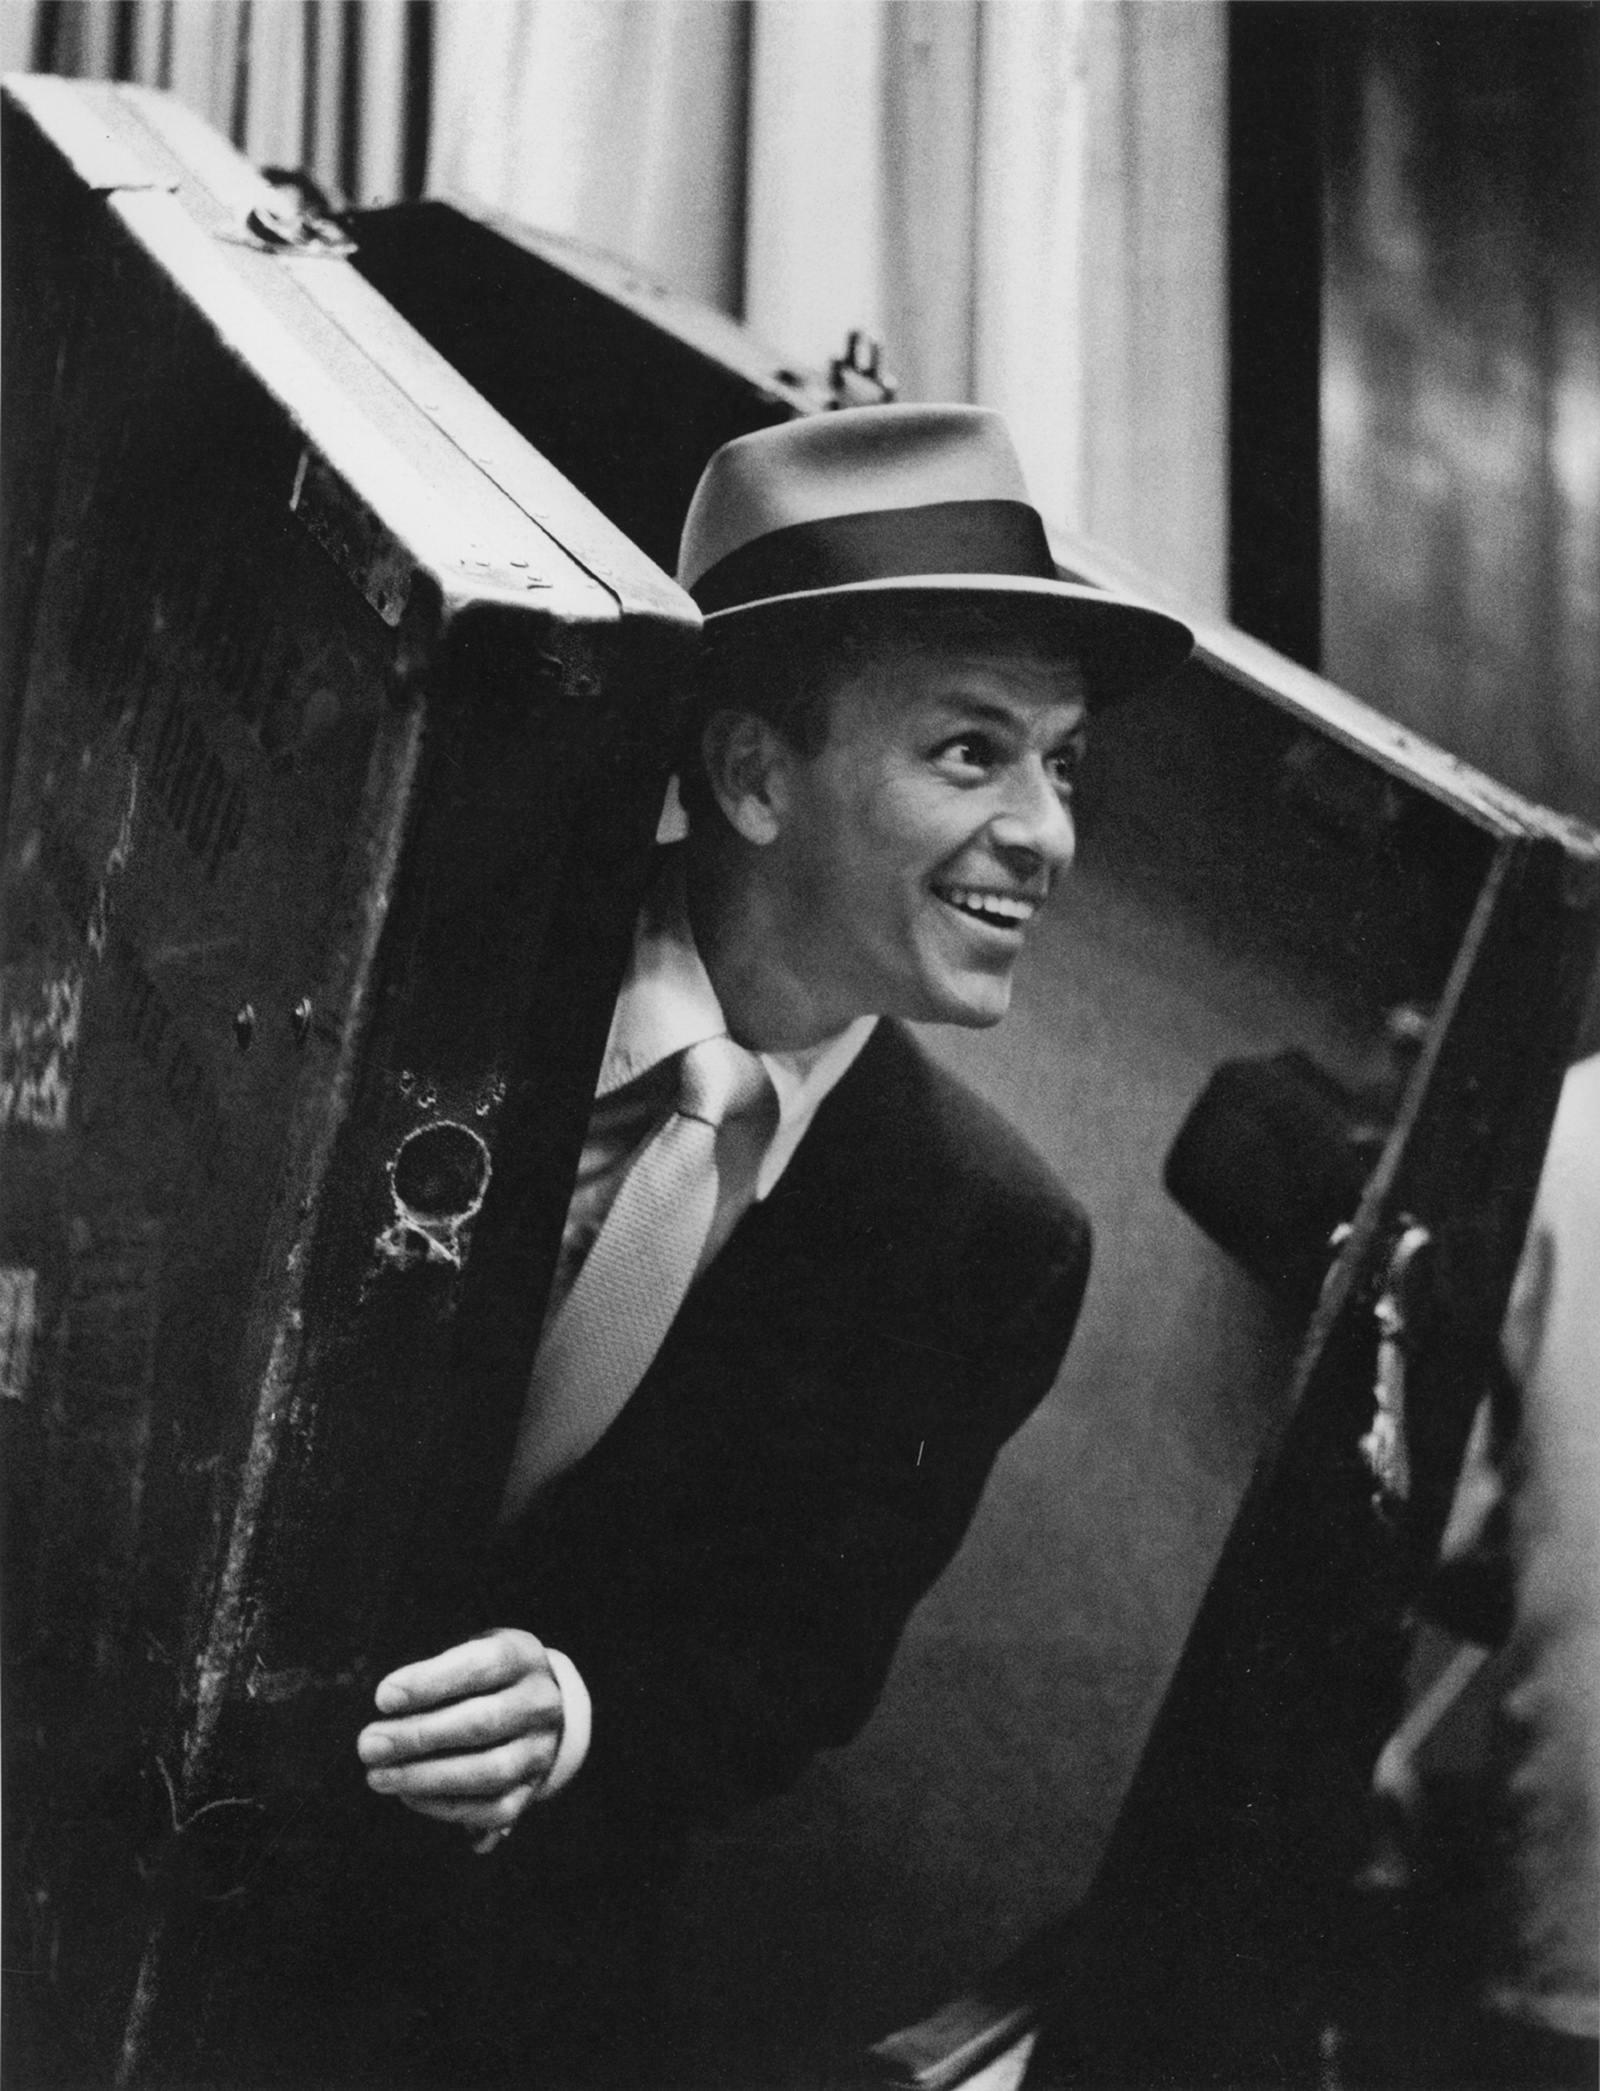 Frank Sinatra, Hollywood, 1955; photograph by William Claxton from Sinatra, a limited-edition book compiled by Amanda Erlinger and Robin Morgan, published by ACC Editions